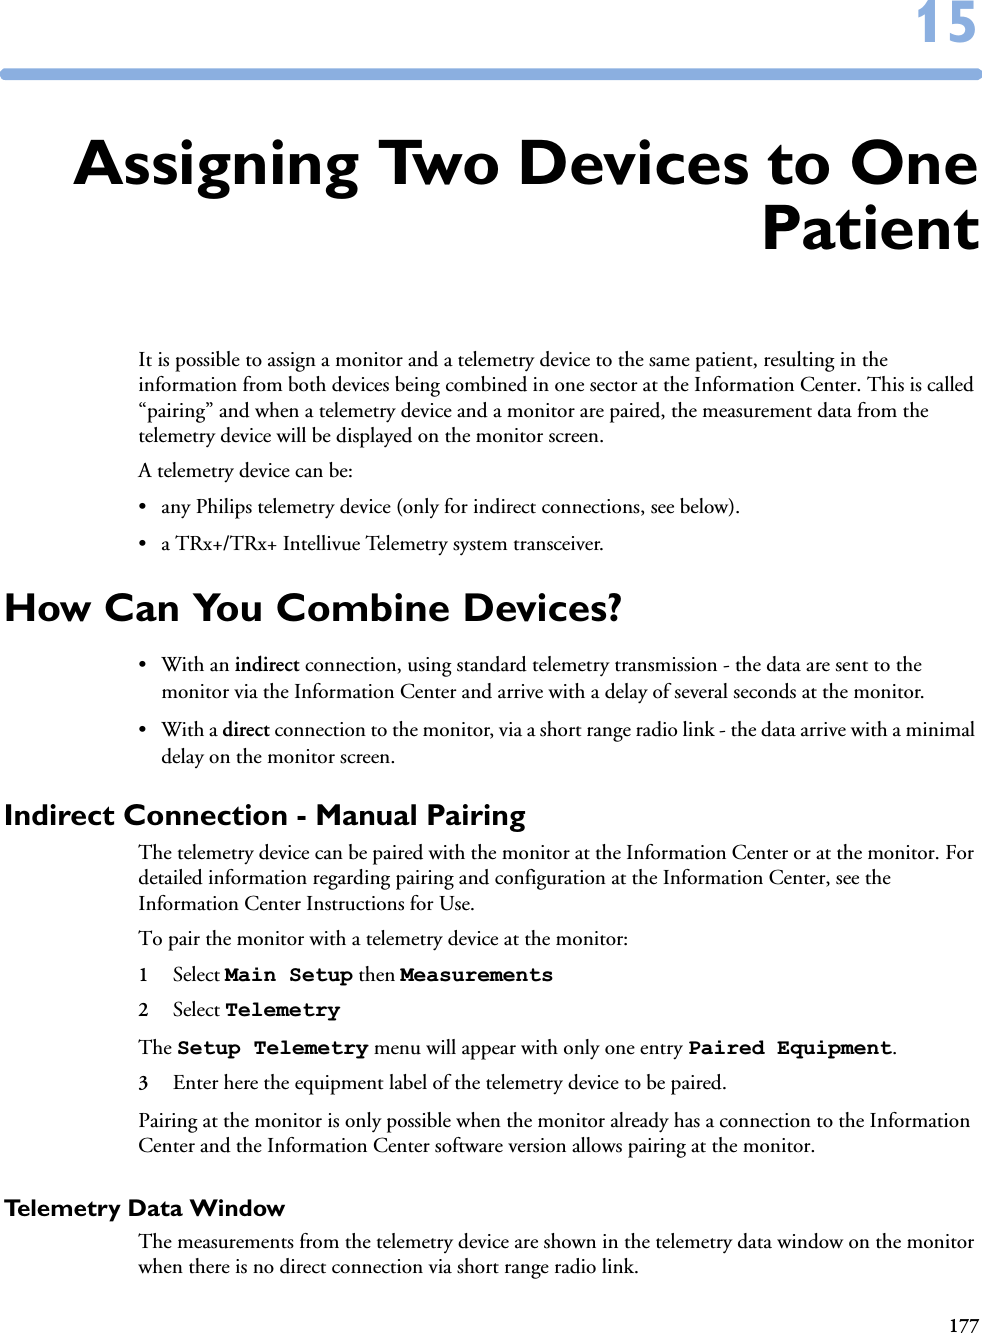 1771515Assigning Two Devices to OnePatientIt is possible to assign a monitor and a telemetry device to the same patient, resulting in the information from both devices being combined in one sector at the Information Center. This is called “pairing” and when a telemetry device and a monitor are paired, the measurement data from the telemetry device will be displayed on the monitor screen. A telemetry device can be:• any Philips telemetry device (only for indirect connections, see below).• a TRx+/TRx+ Intellivue Telemetry system transceiver.How Can You Combine Devices?•With an indirect connection, using standard telemetry transmission - the data are sent to the monitor via the Information Center and arrive with a delay of several seconds at the monitor. •With a direct connection to the monitor, via a short range radio link - the data arrive with a minimal delay on the monitor screen.Indirect Connection - Manual PairingThe telemetry device can be paired with the monitor at the Information Center or at the monitor. For detailed information regarding pairing and configuration at the Information Center, see the Information Center Instructions for Use.To pair the monitor with a telemetry device at the monitor:1Select Main Setup then Measurements 2Select Telemetry The Setup Telemetry menu will appear with only one entry Paired Equipment.3Enter here the equipment label of the telemetry device to be paired. Pairing at the monitor is only possible when the monitor already has a connection to the Information Center and the Information Center software version allows pairing at the monitor.Telemetry Data WindowThe measurements from the telemetry device are shown in the telemetry data window on the monitor when there is no direct connection via short range radio link. 